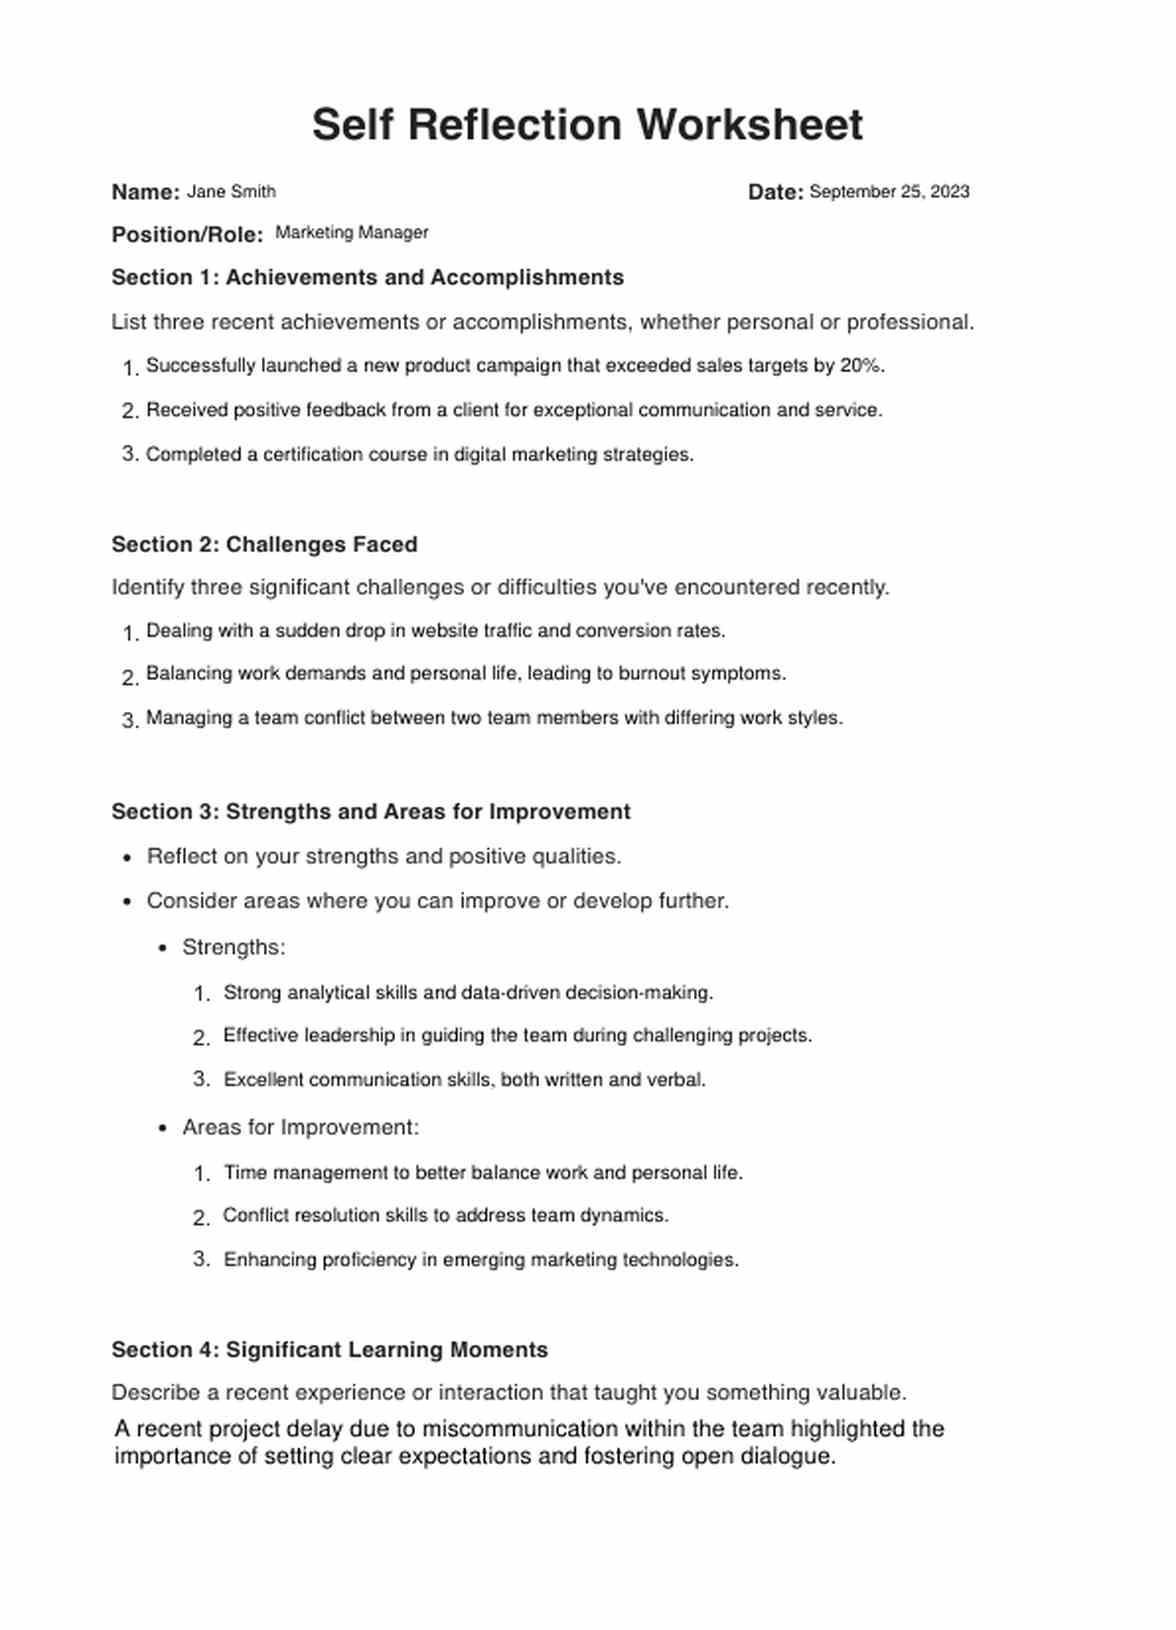 Self Reflection Worksheets PDF Example